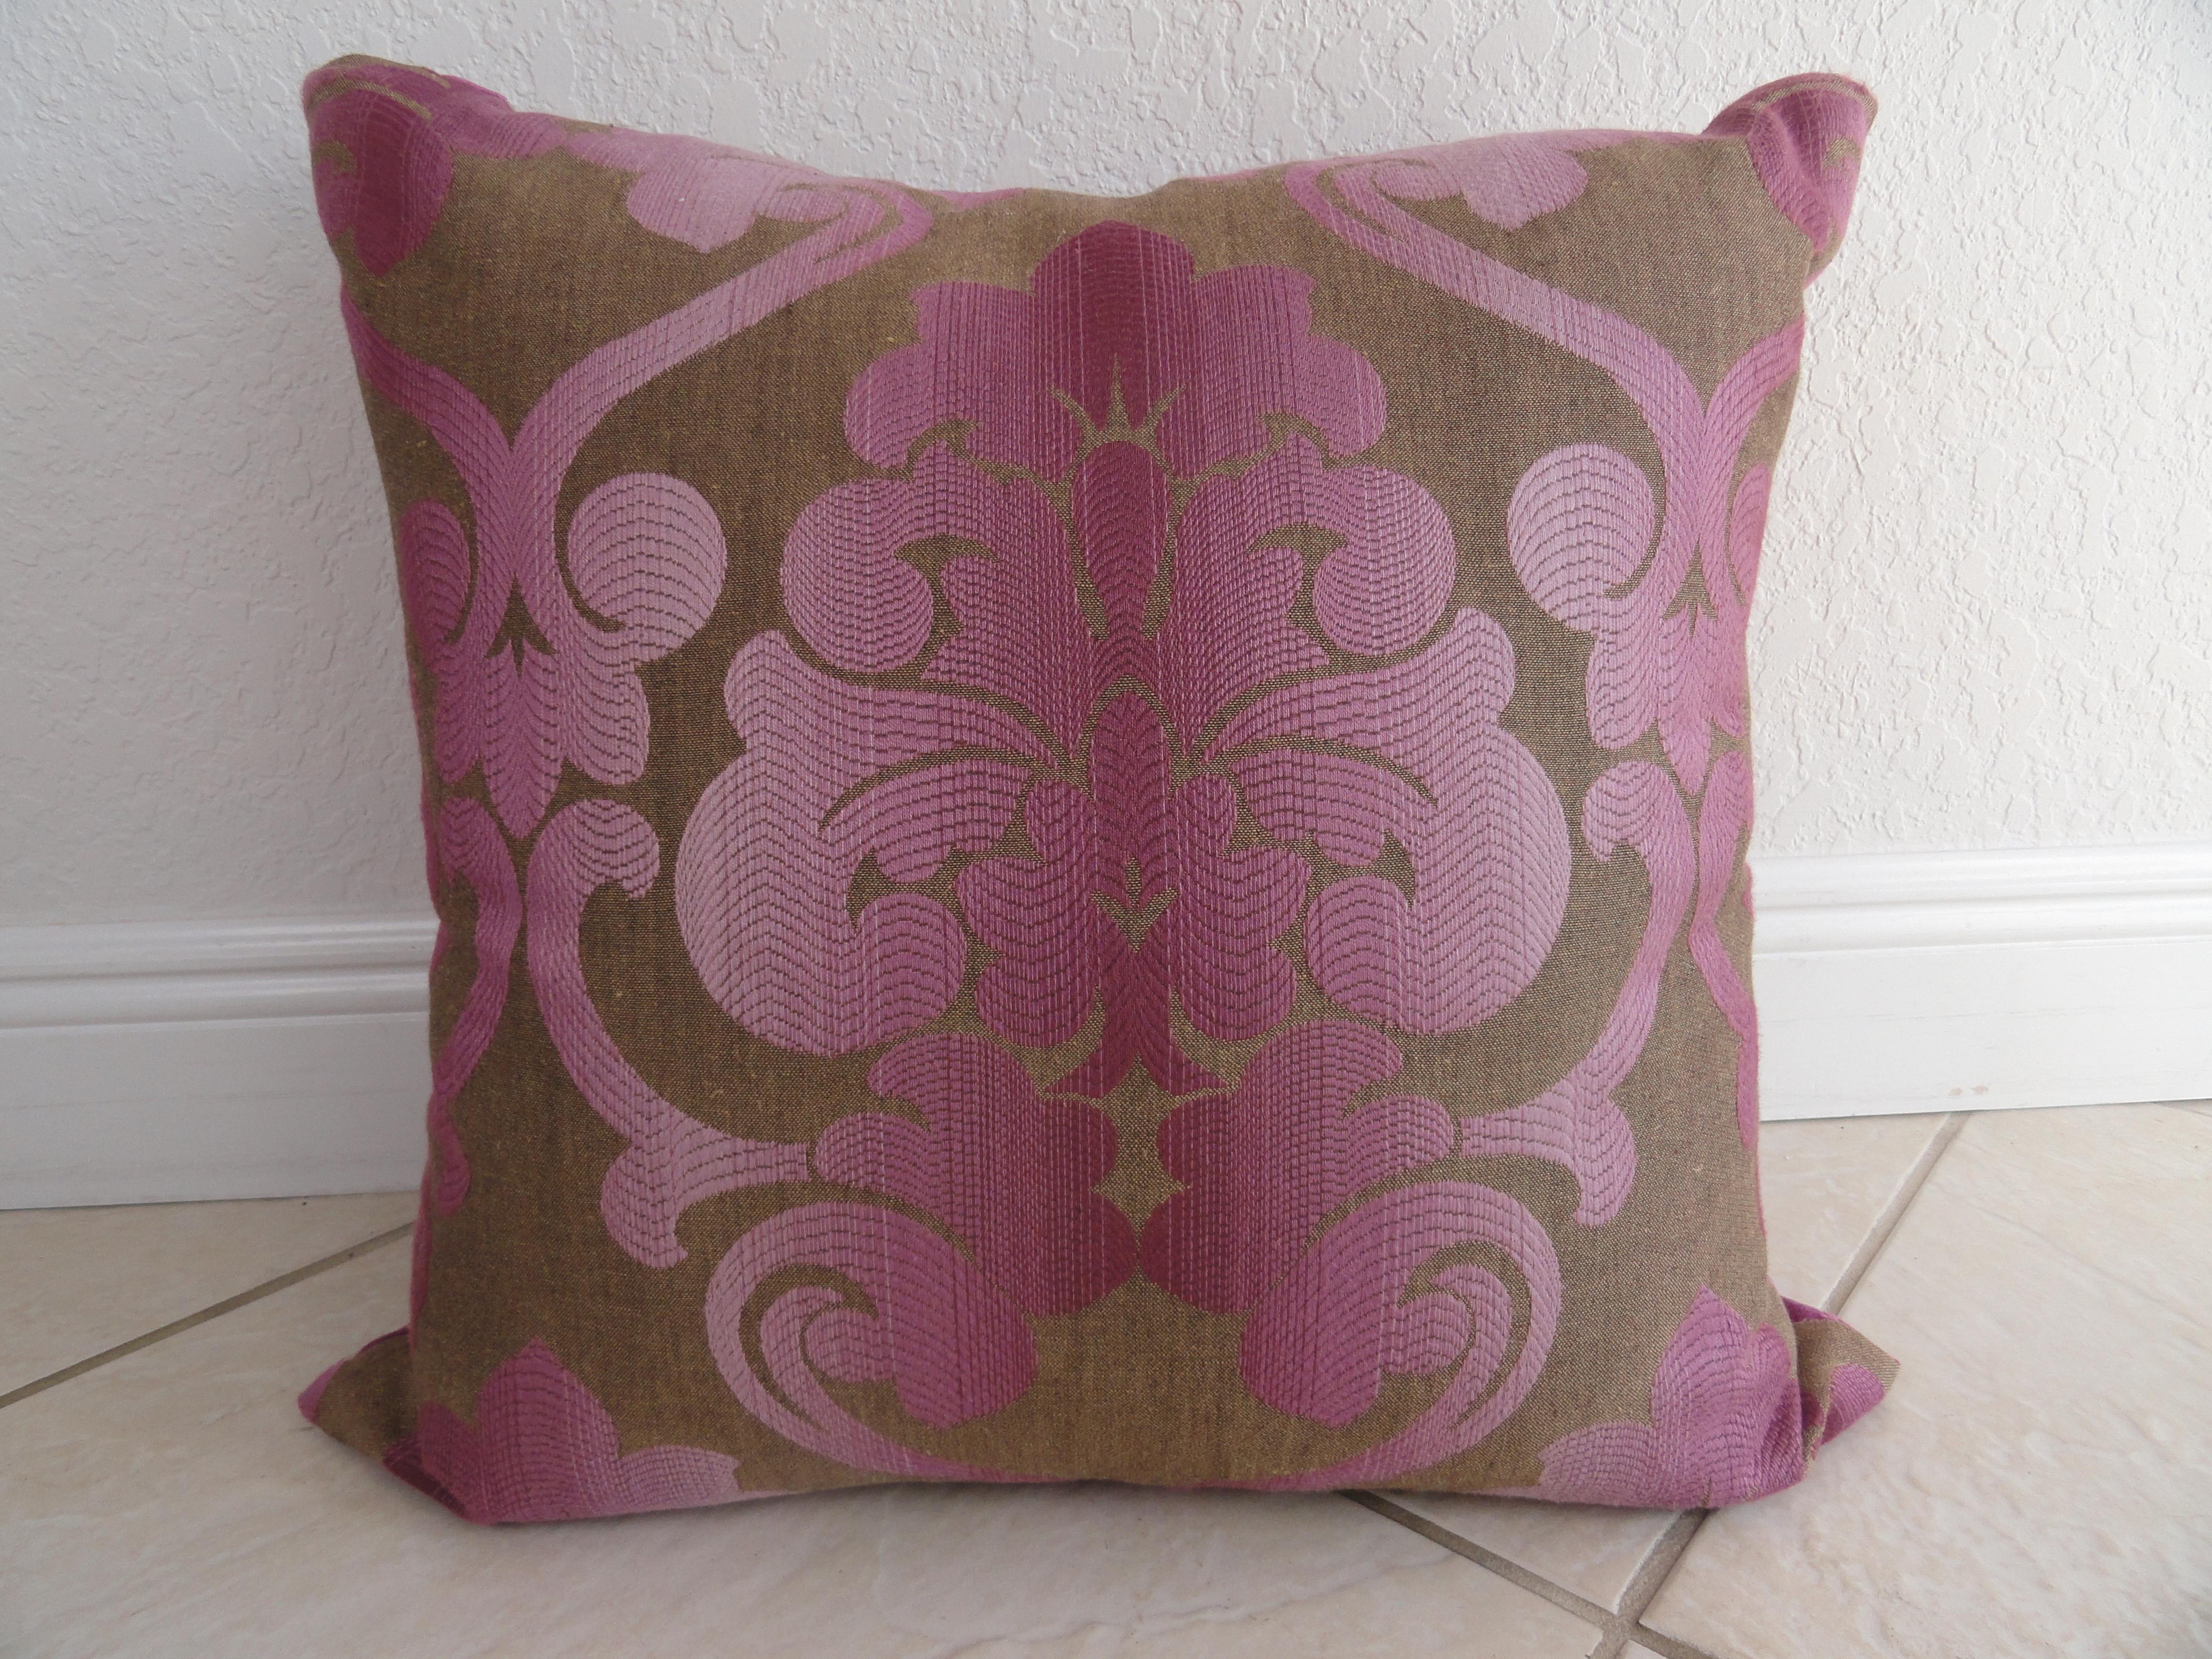 New pair of brocade pillows with velvet back, 20 inch squares.